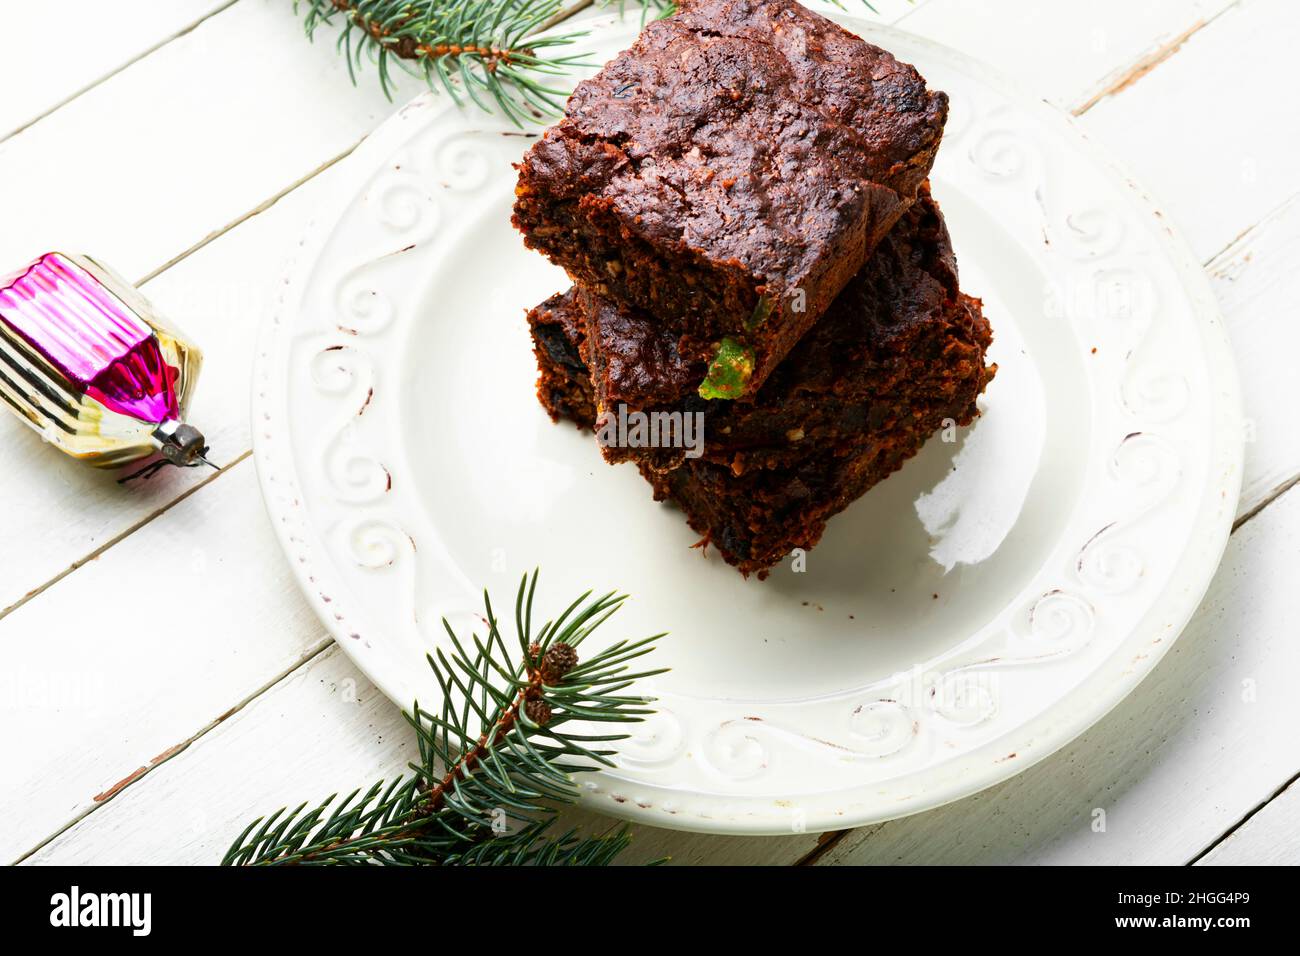 Panforte is a Christmas or New Year pastry made from a mixture of nuts, candied fruits, spices, honey. Stock Photo